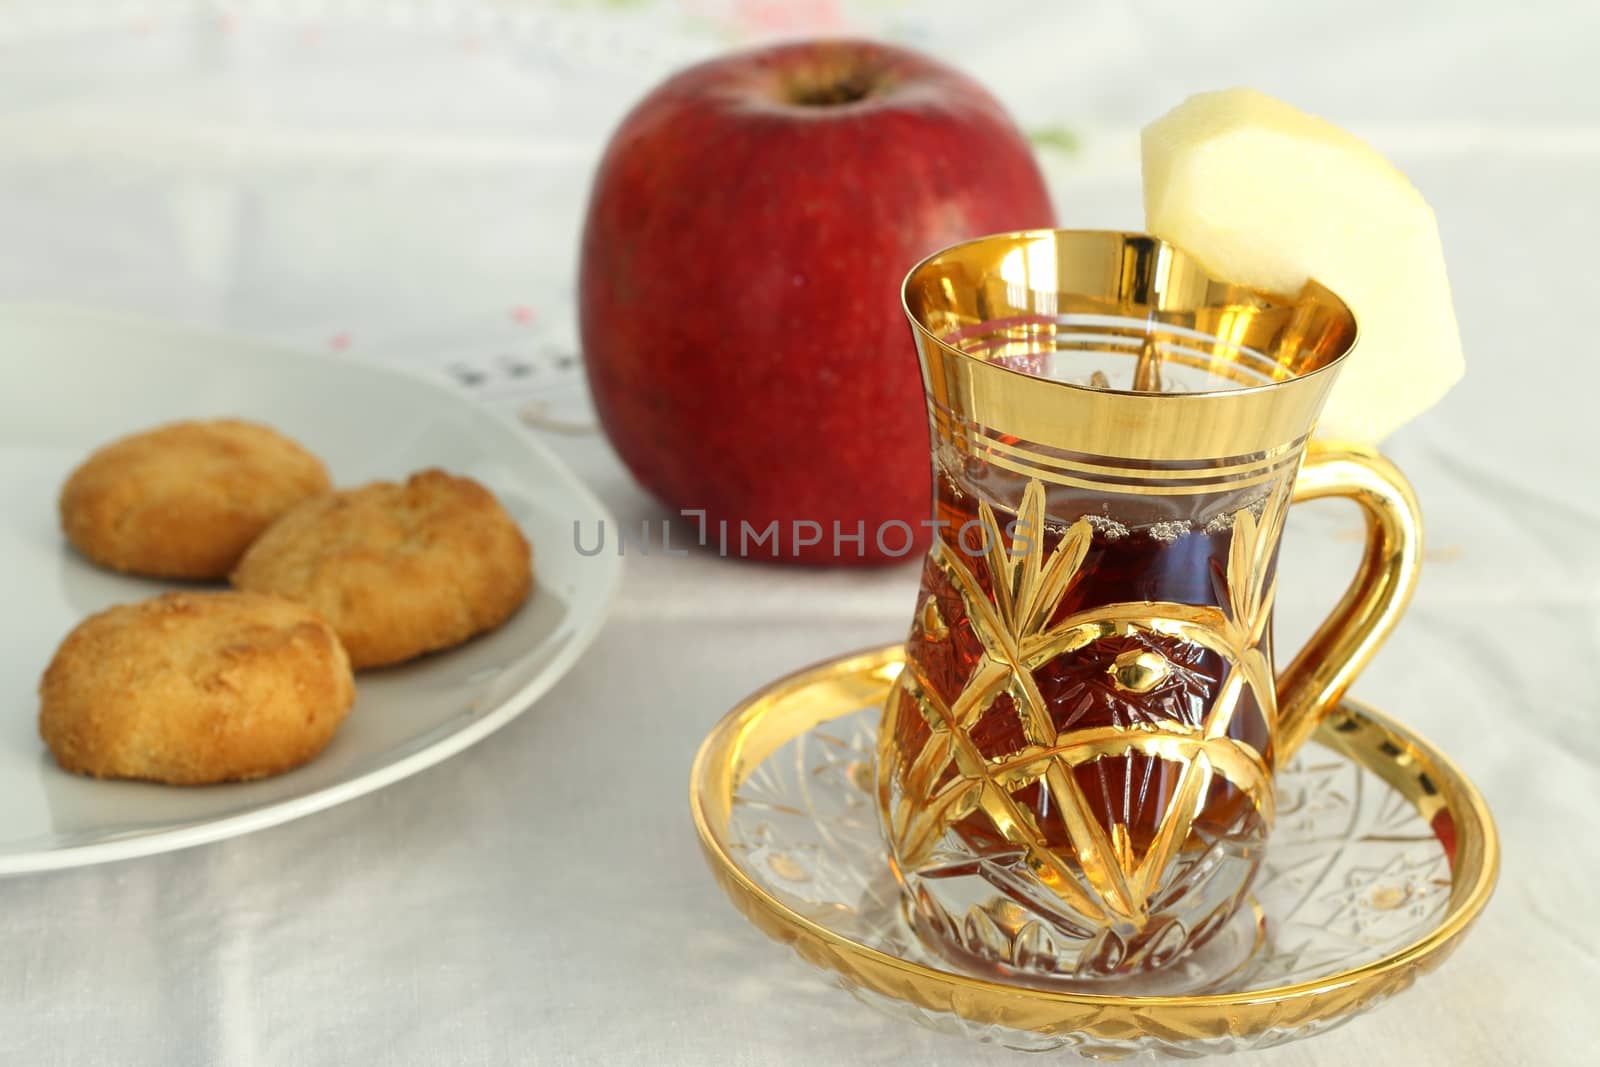 Cup of apple tea with biscuits